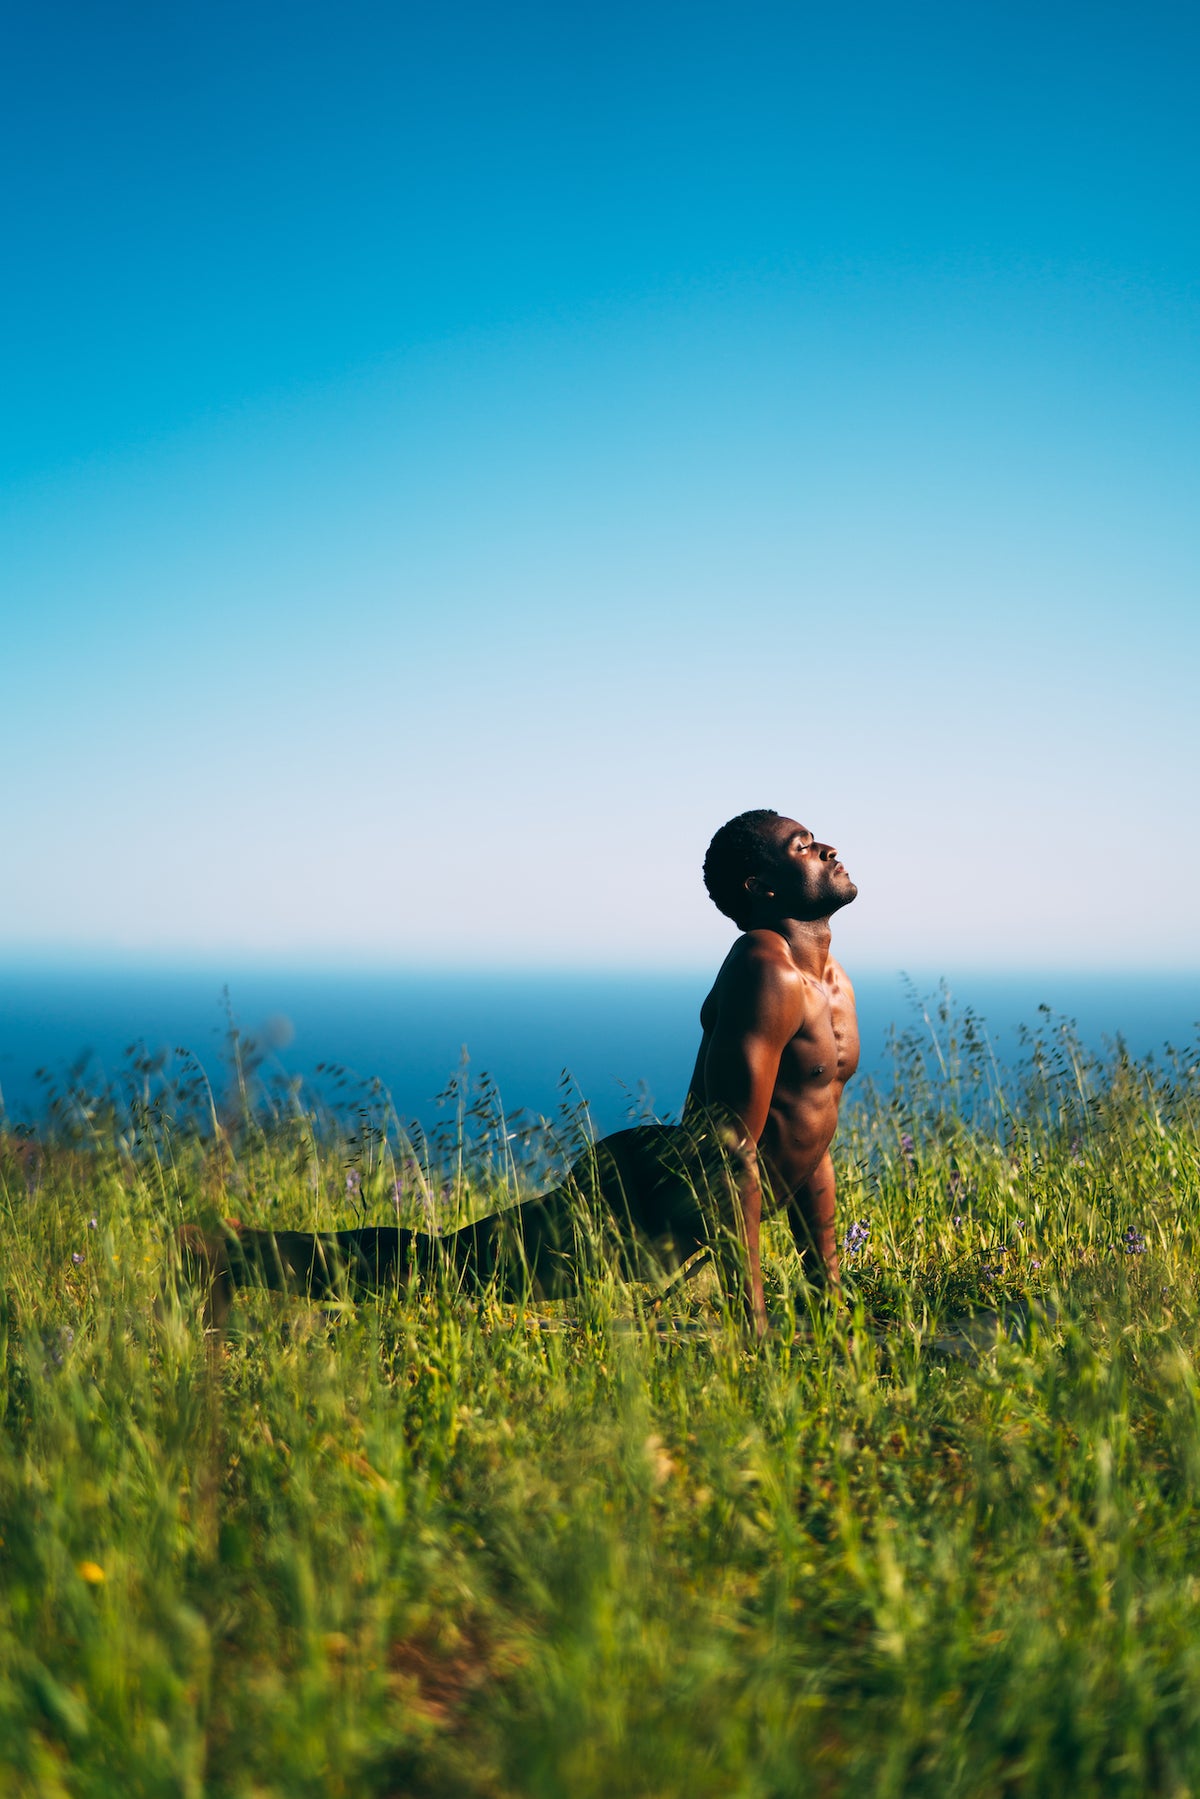 Man performing Upward Dog while in tall grass overlooking the ocean.  